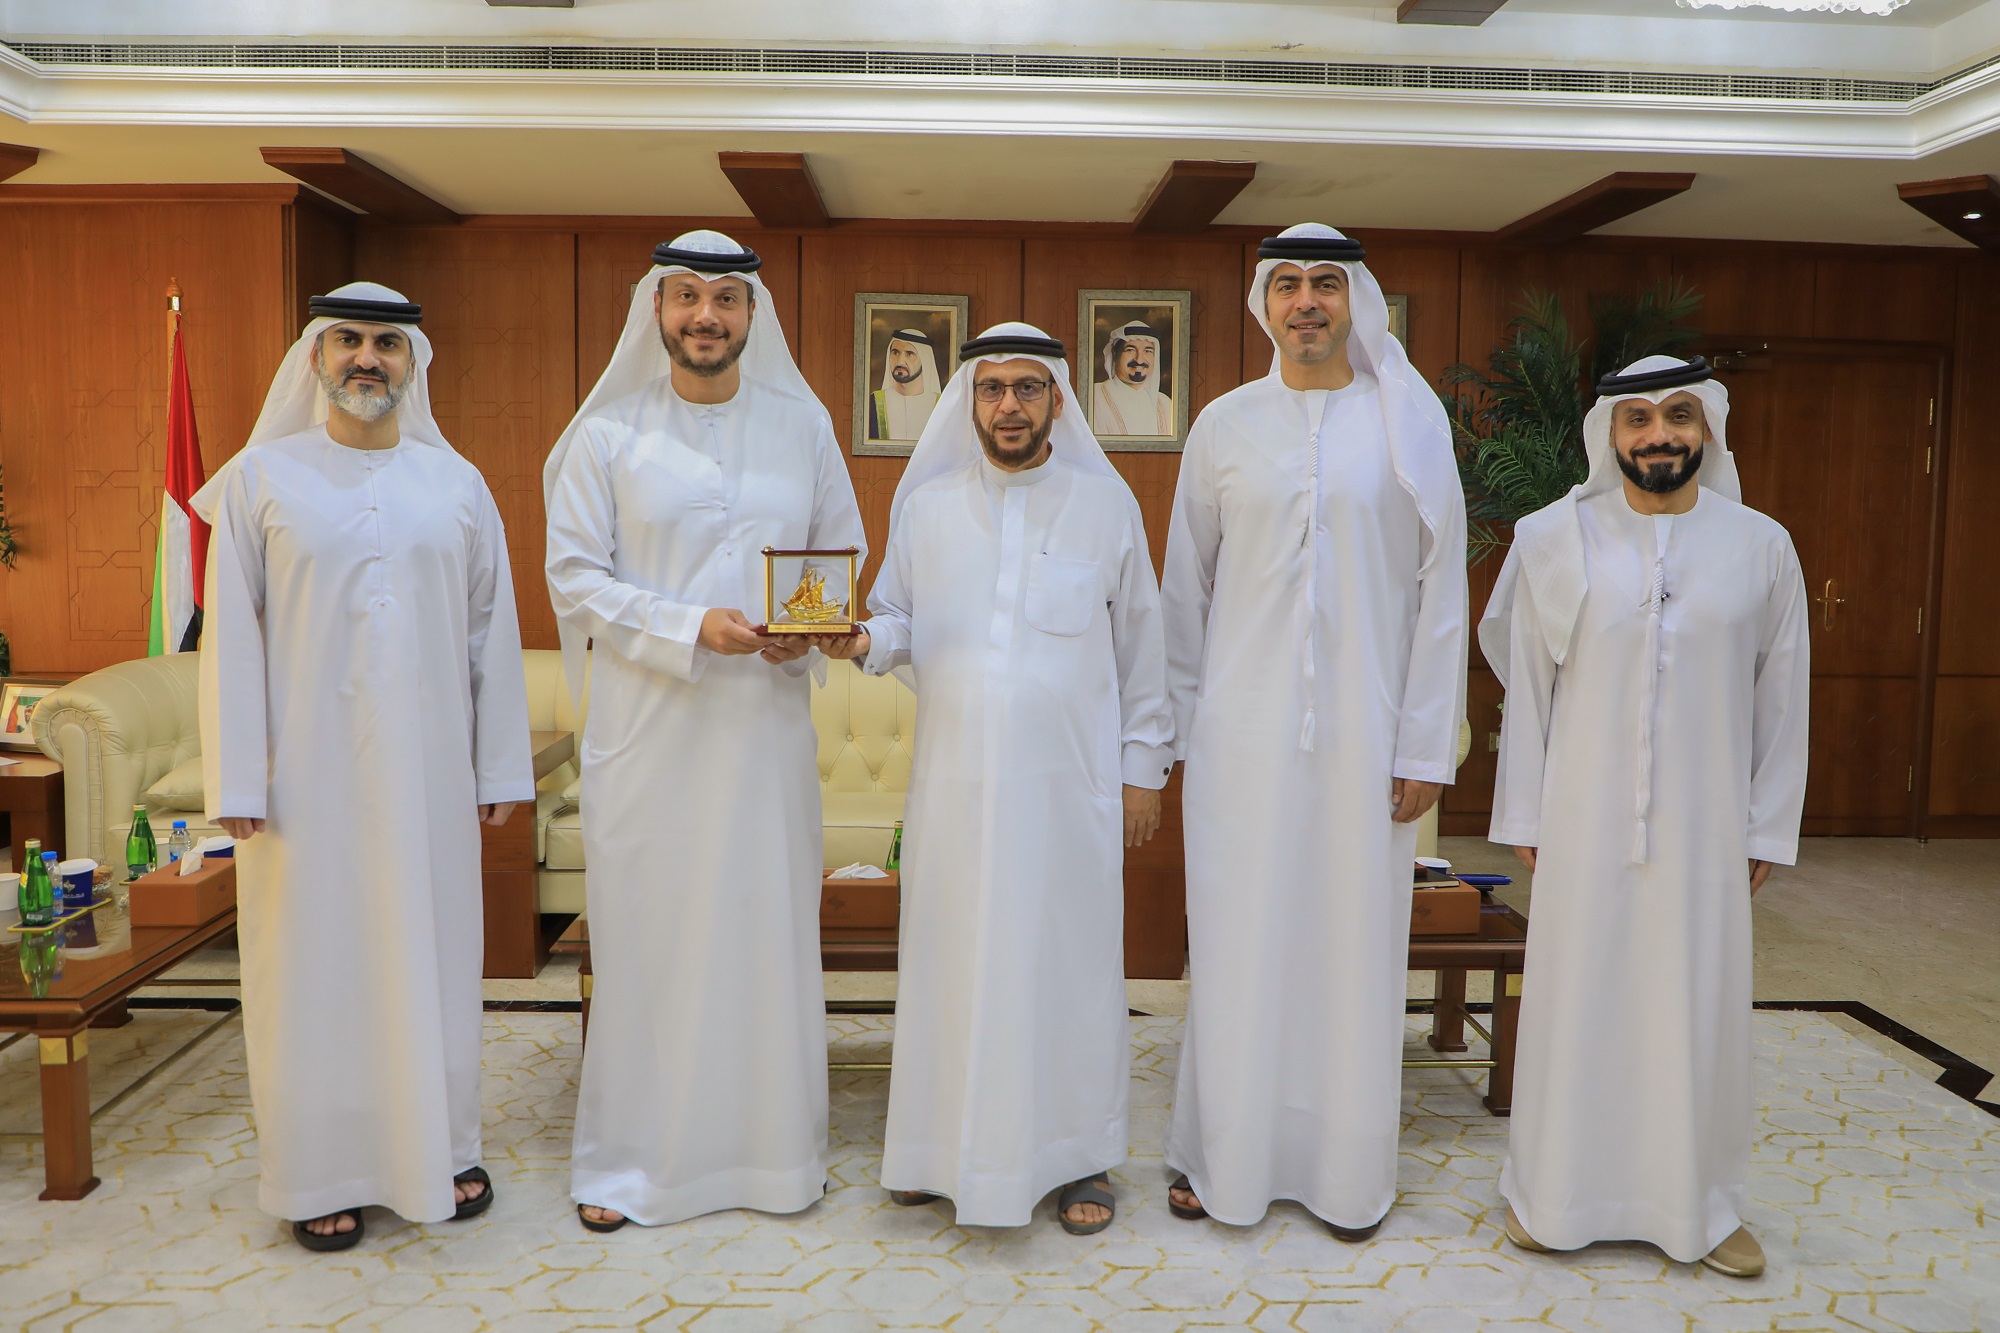 Ajman Chamber and Ajman Bank discuss opportunities for growth of the private sector businesses